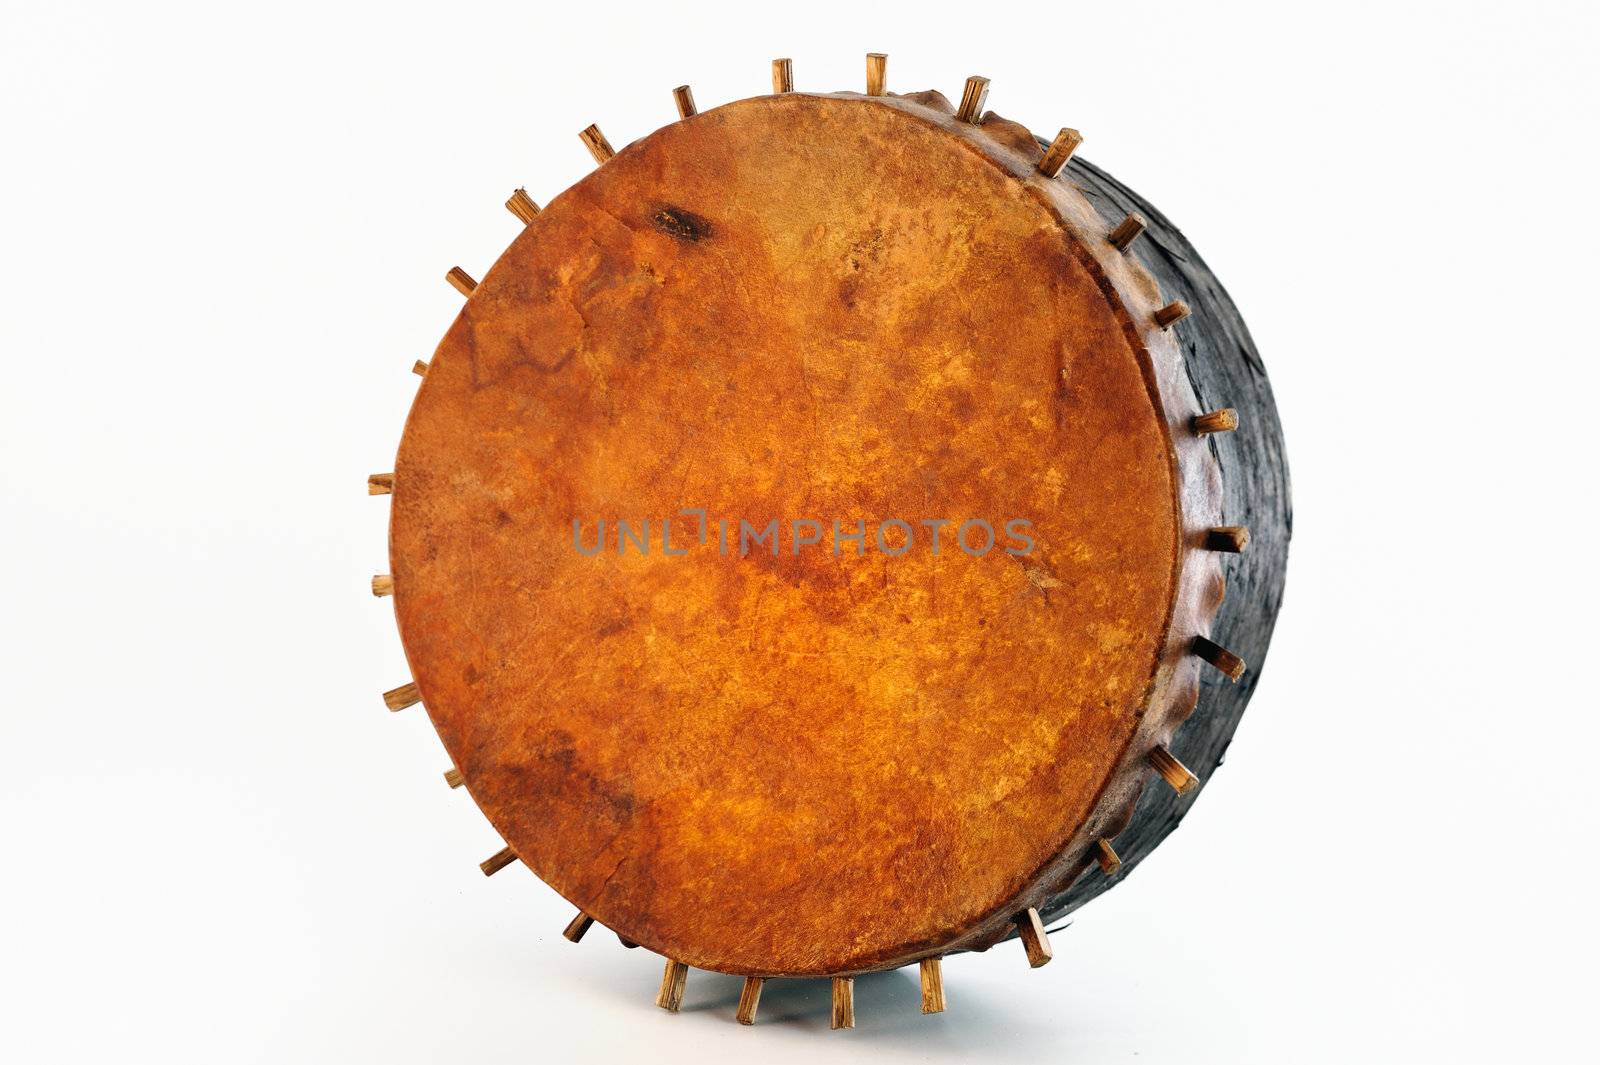 Ethnic drum from a skin of a bull